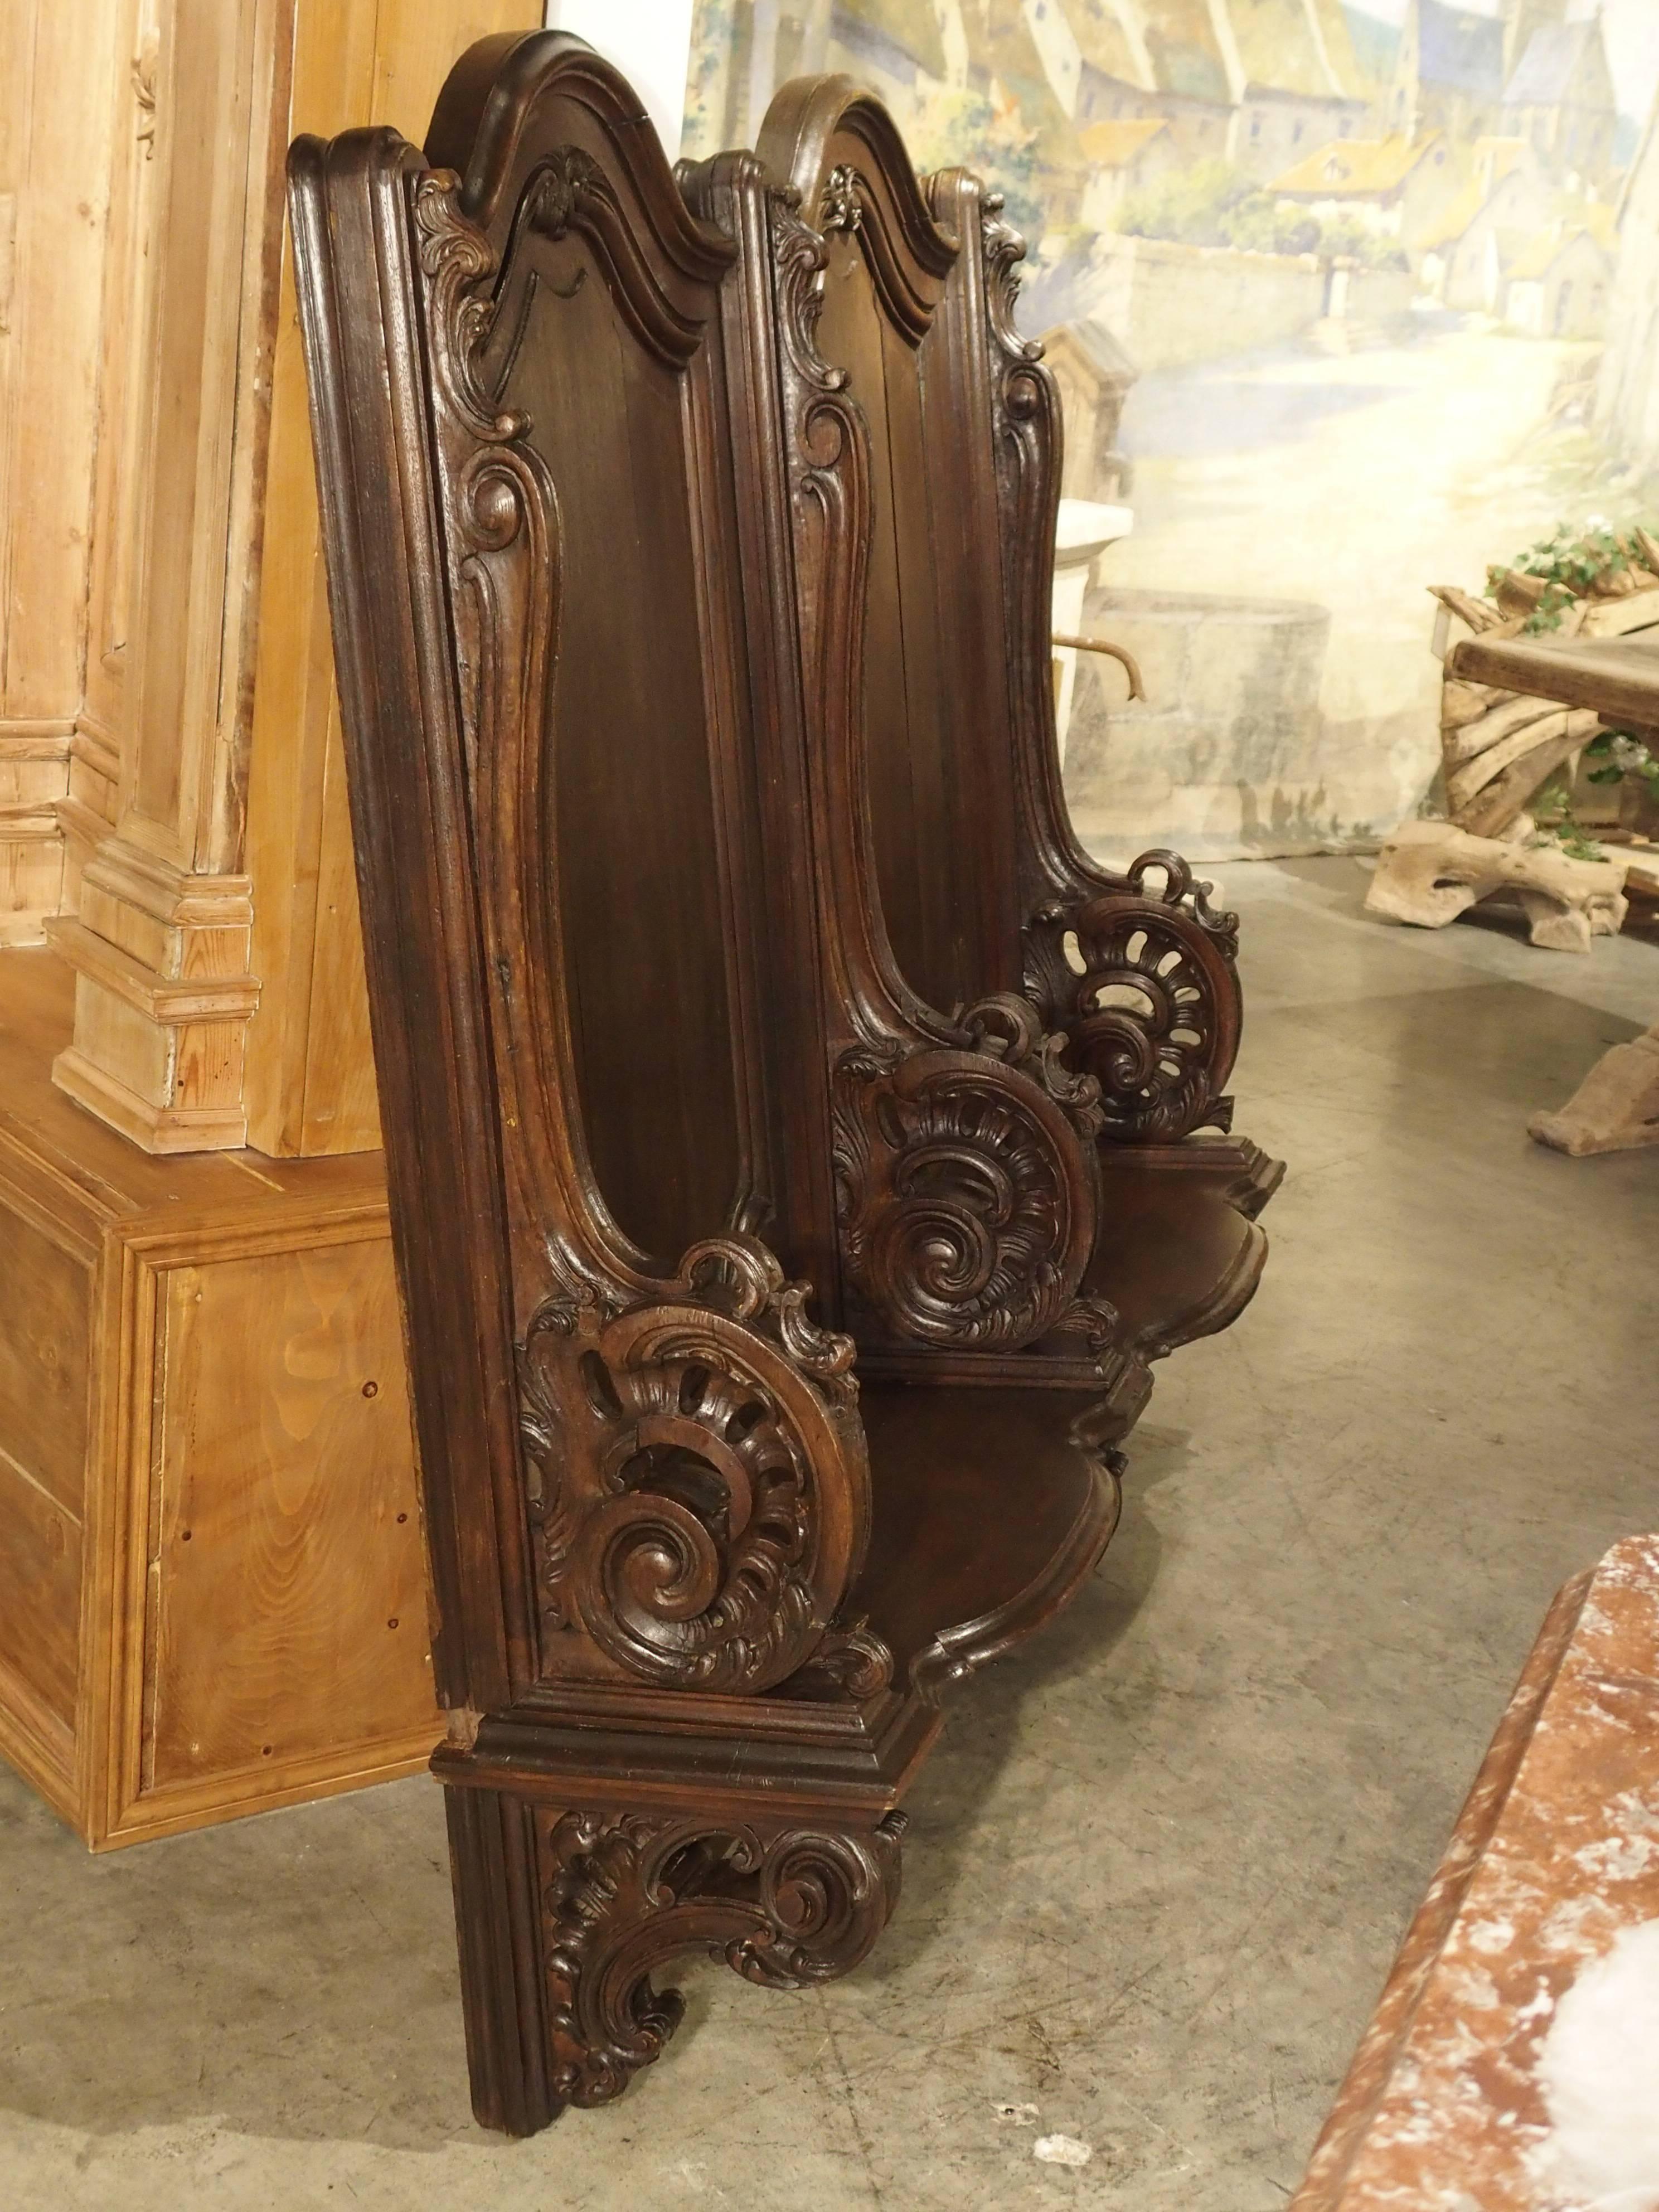 This European oak church stall came from a private chapel of a chateau in Liege, Belgium. This double stall would have been attached to the wall.

There are two seats with central domed tops separated by heavily carved arms. The arms are shaped with